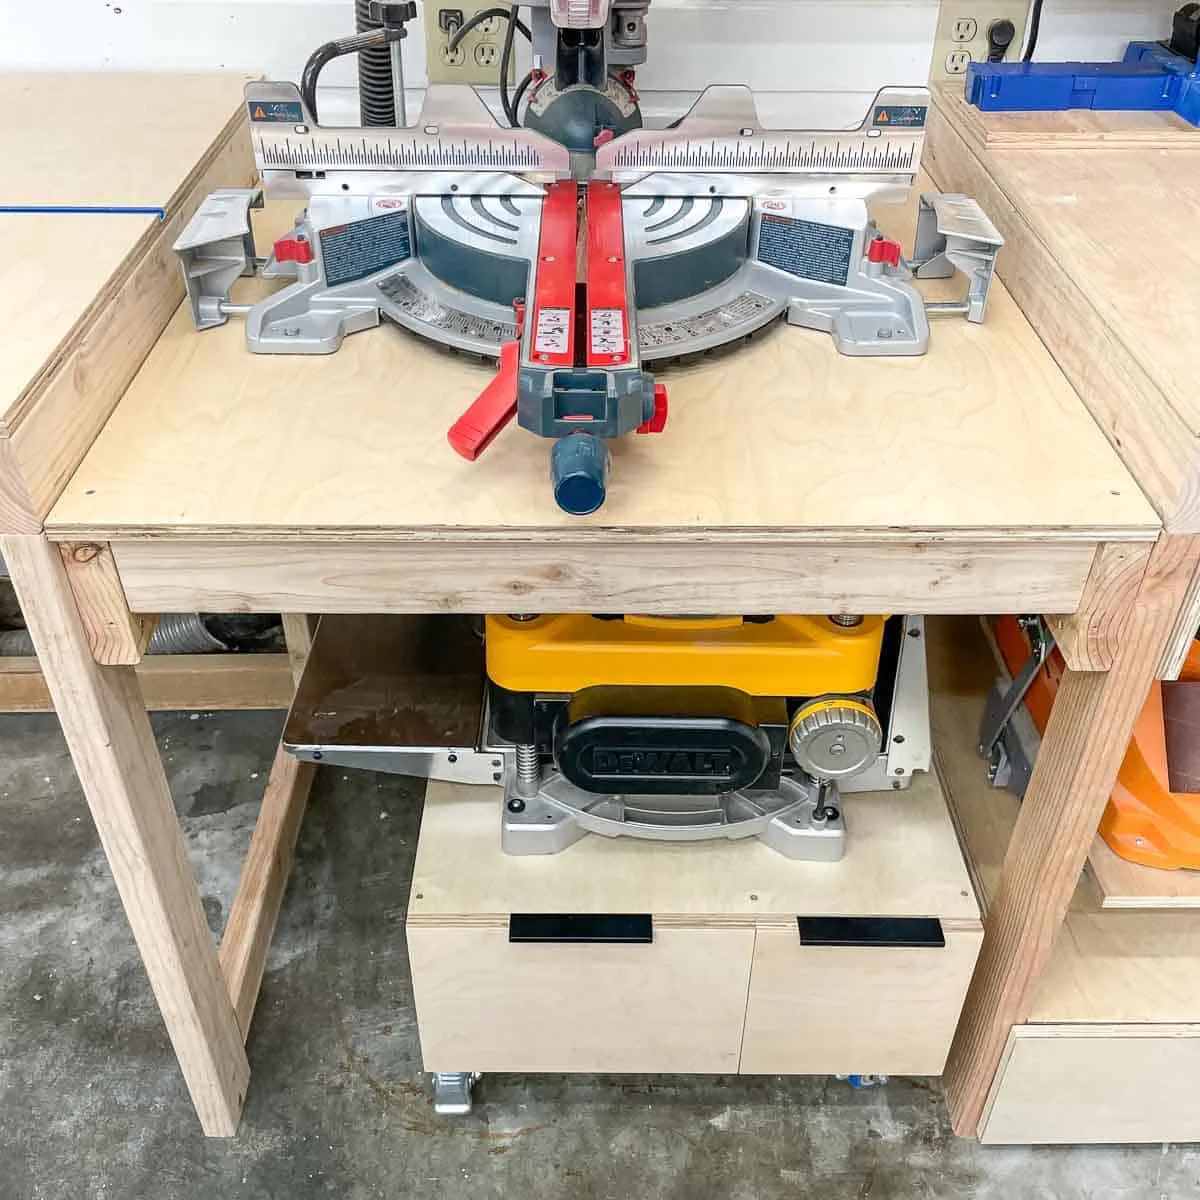 DIY planer stand with drawers under miter saw station